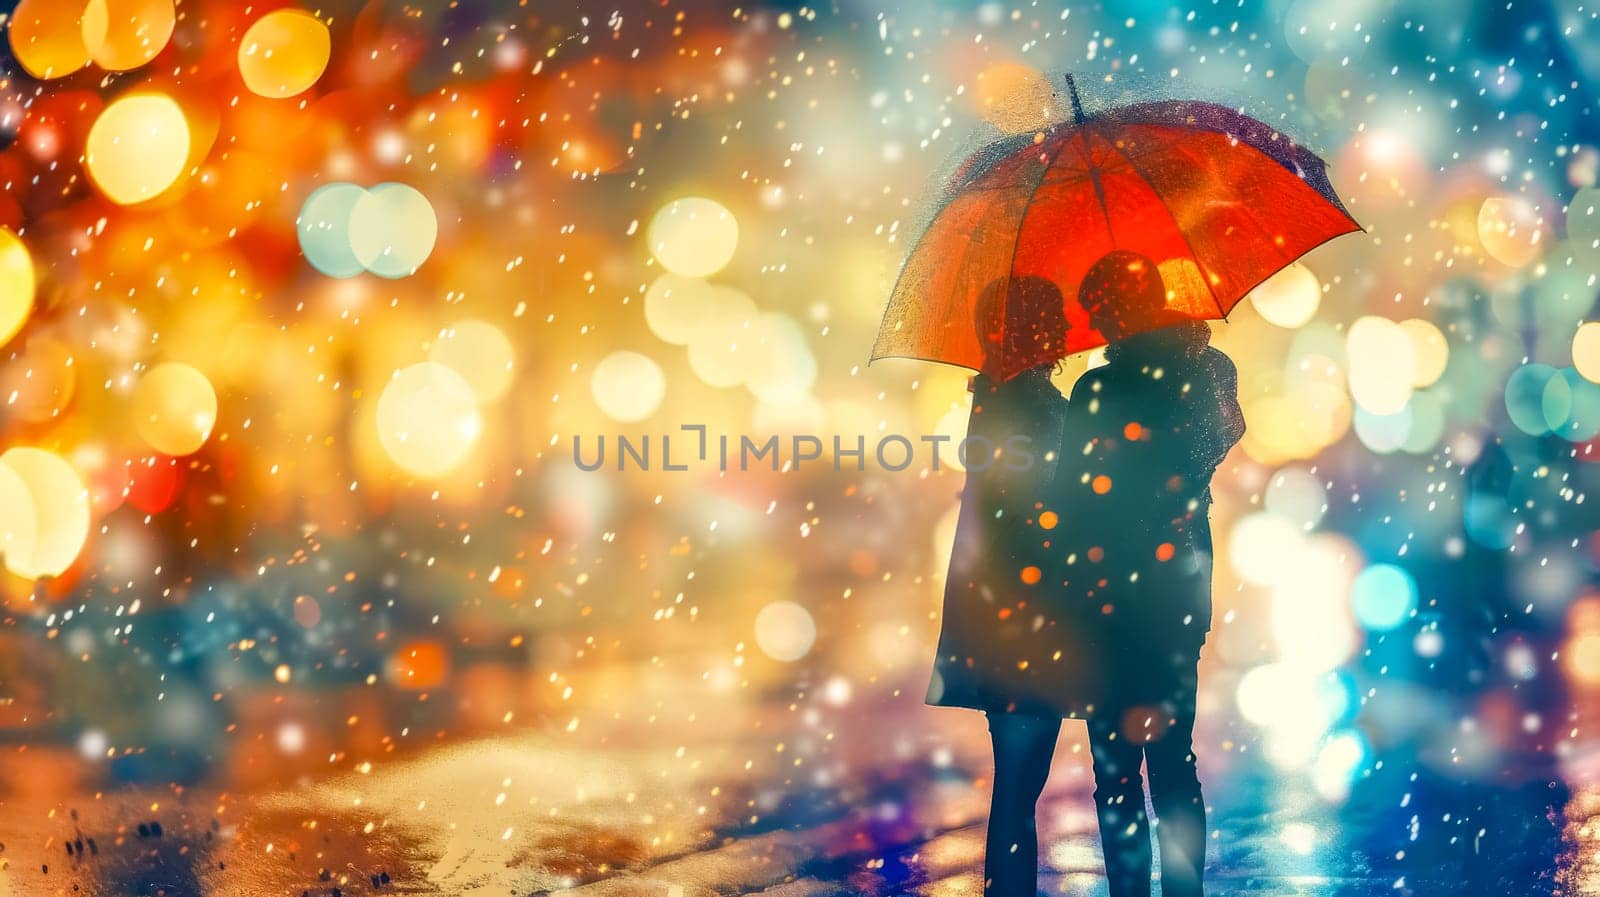 Magical winter evening with umbrella by Edophoto